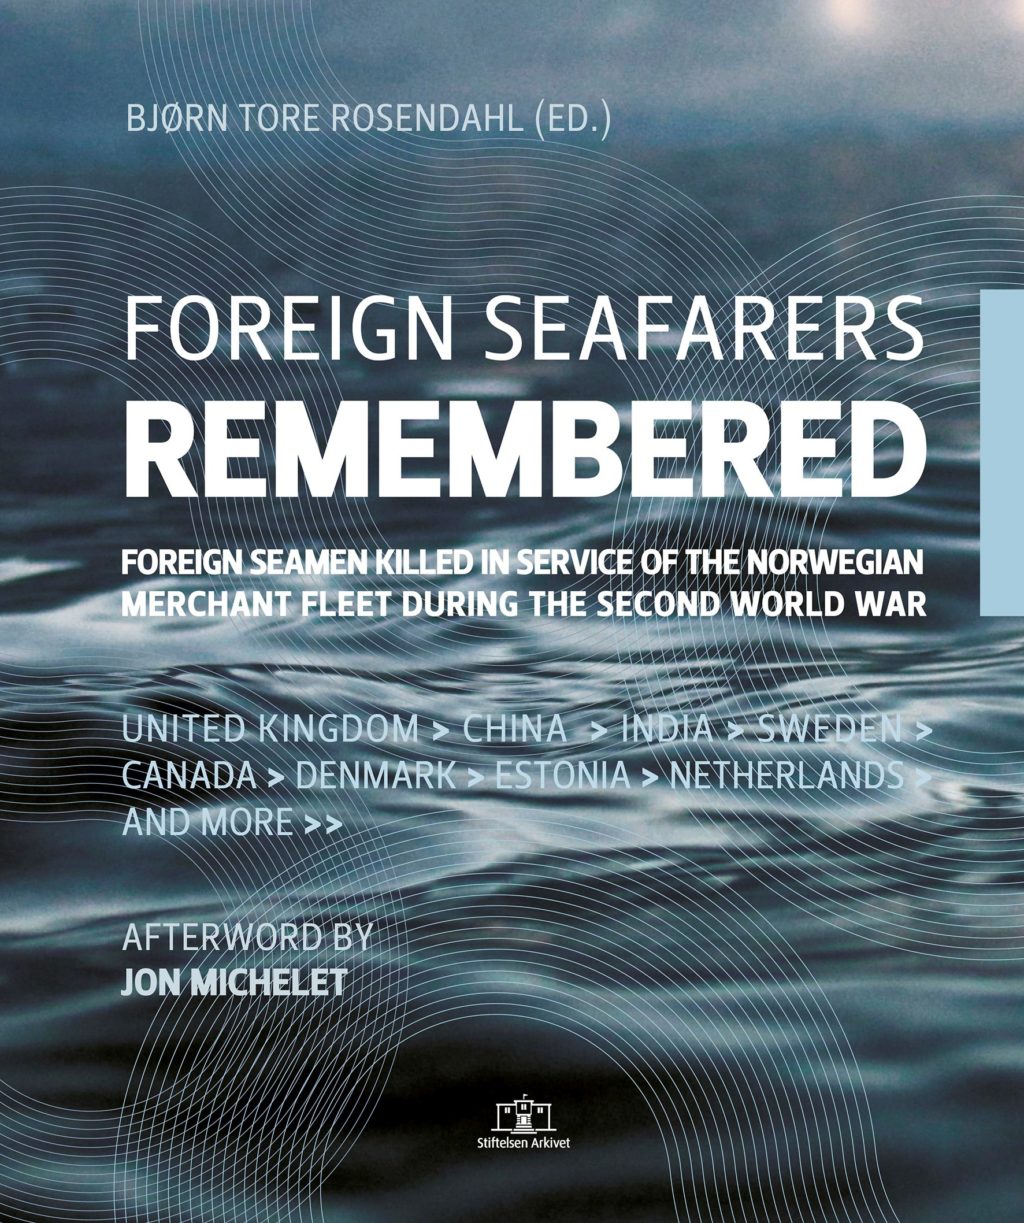 Foreign seafarers remembered